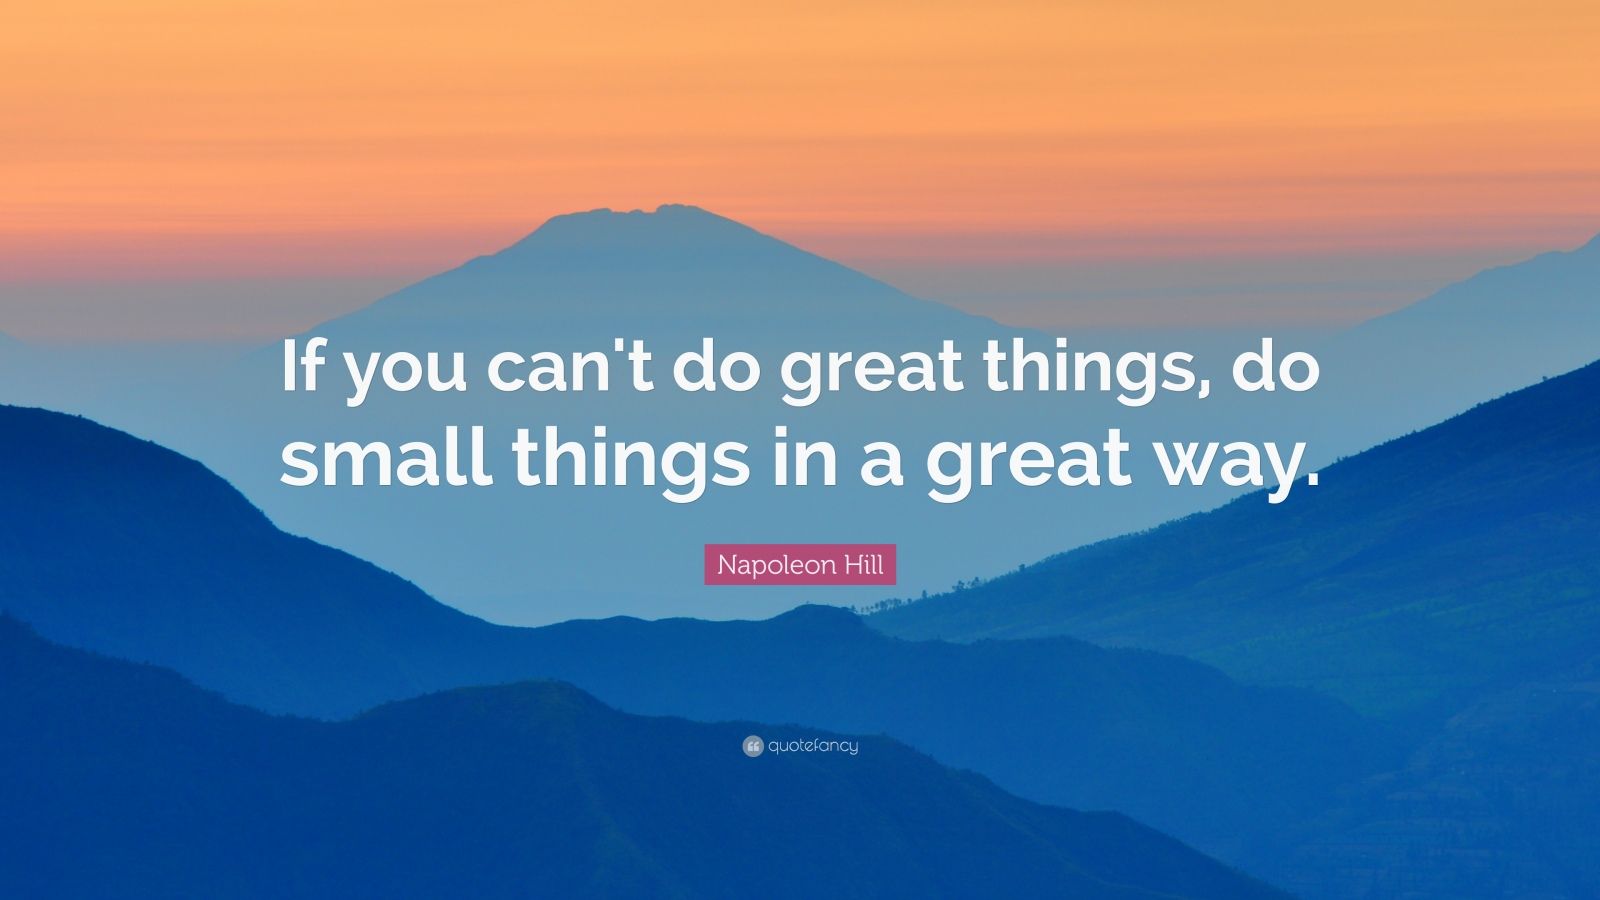 Napoleon Hill Quote: “If you can't do great things, do small things in ...